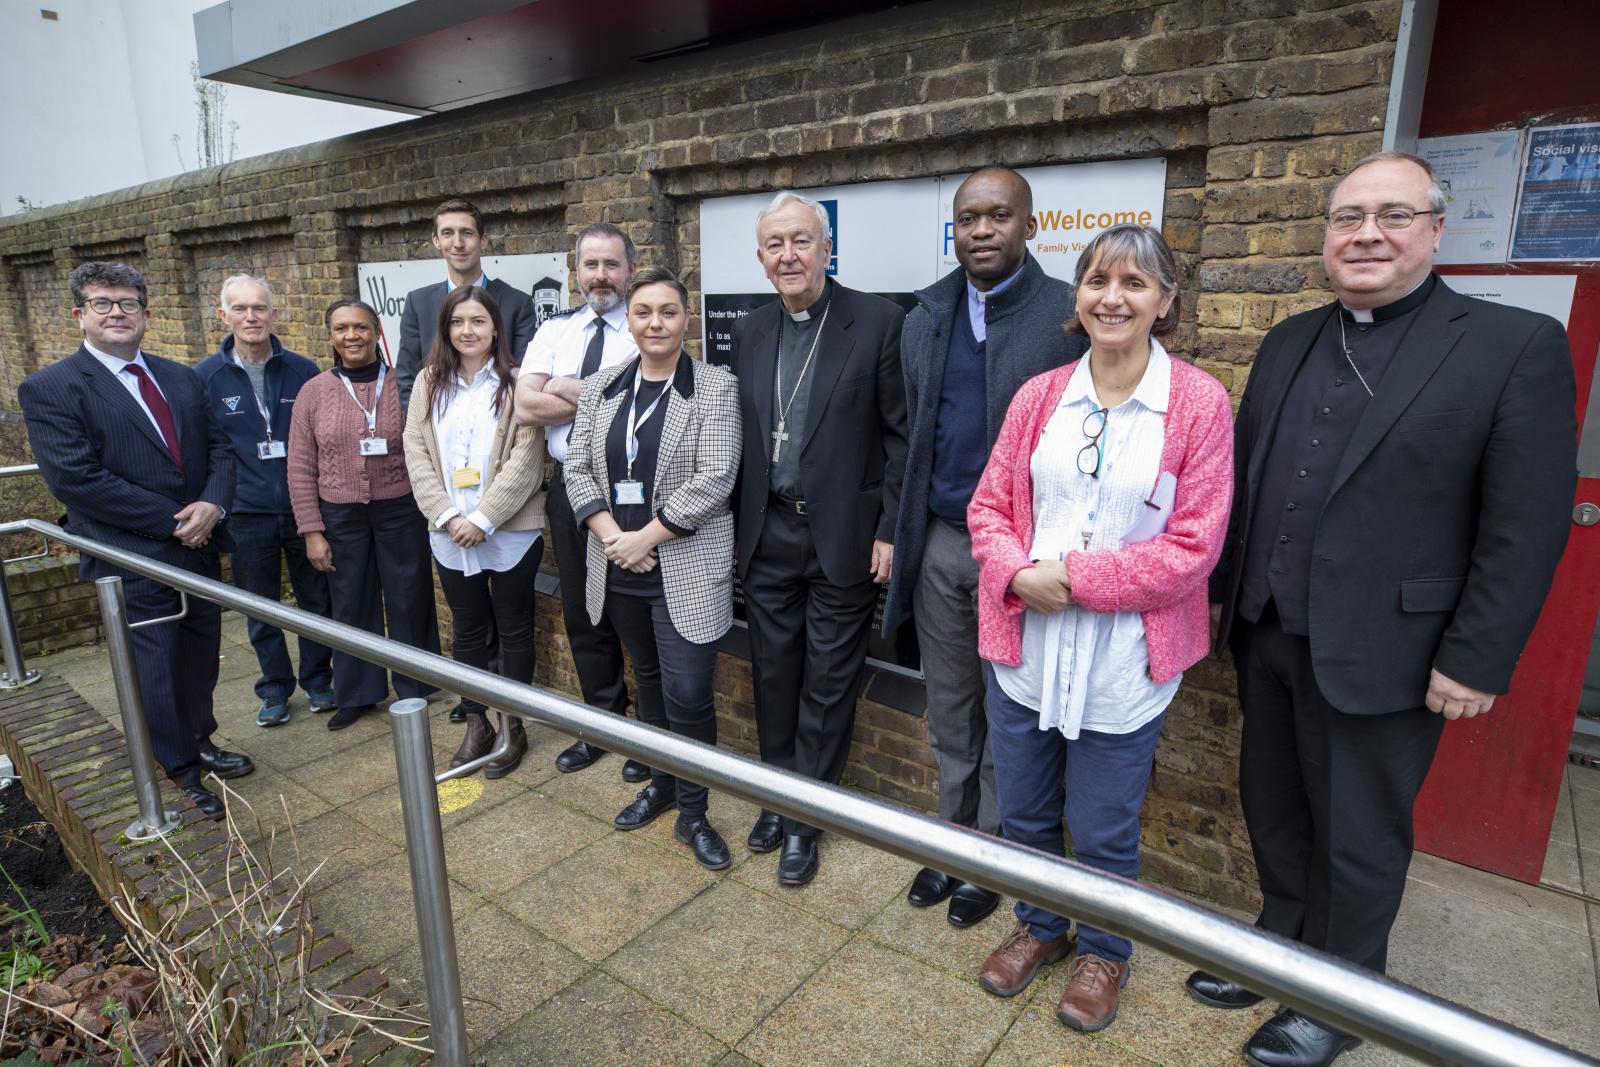 Cardinal listens to prisoners at HMP Wormwood Scrubs  - Diocese of Westminster